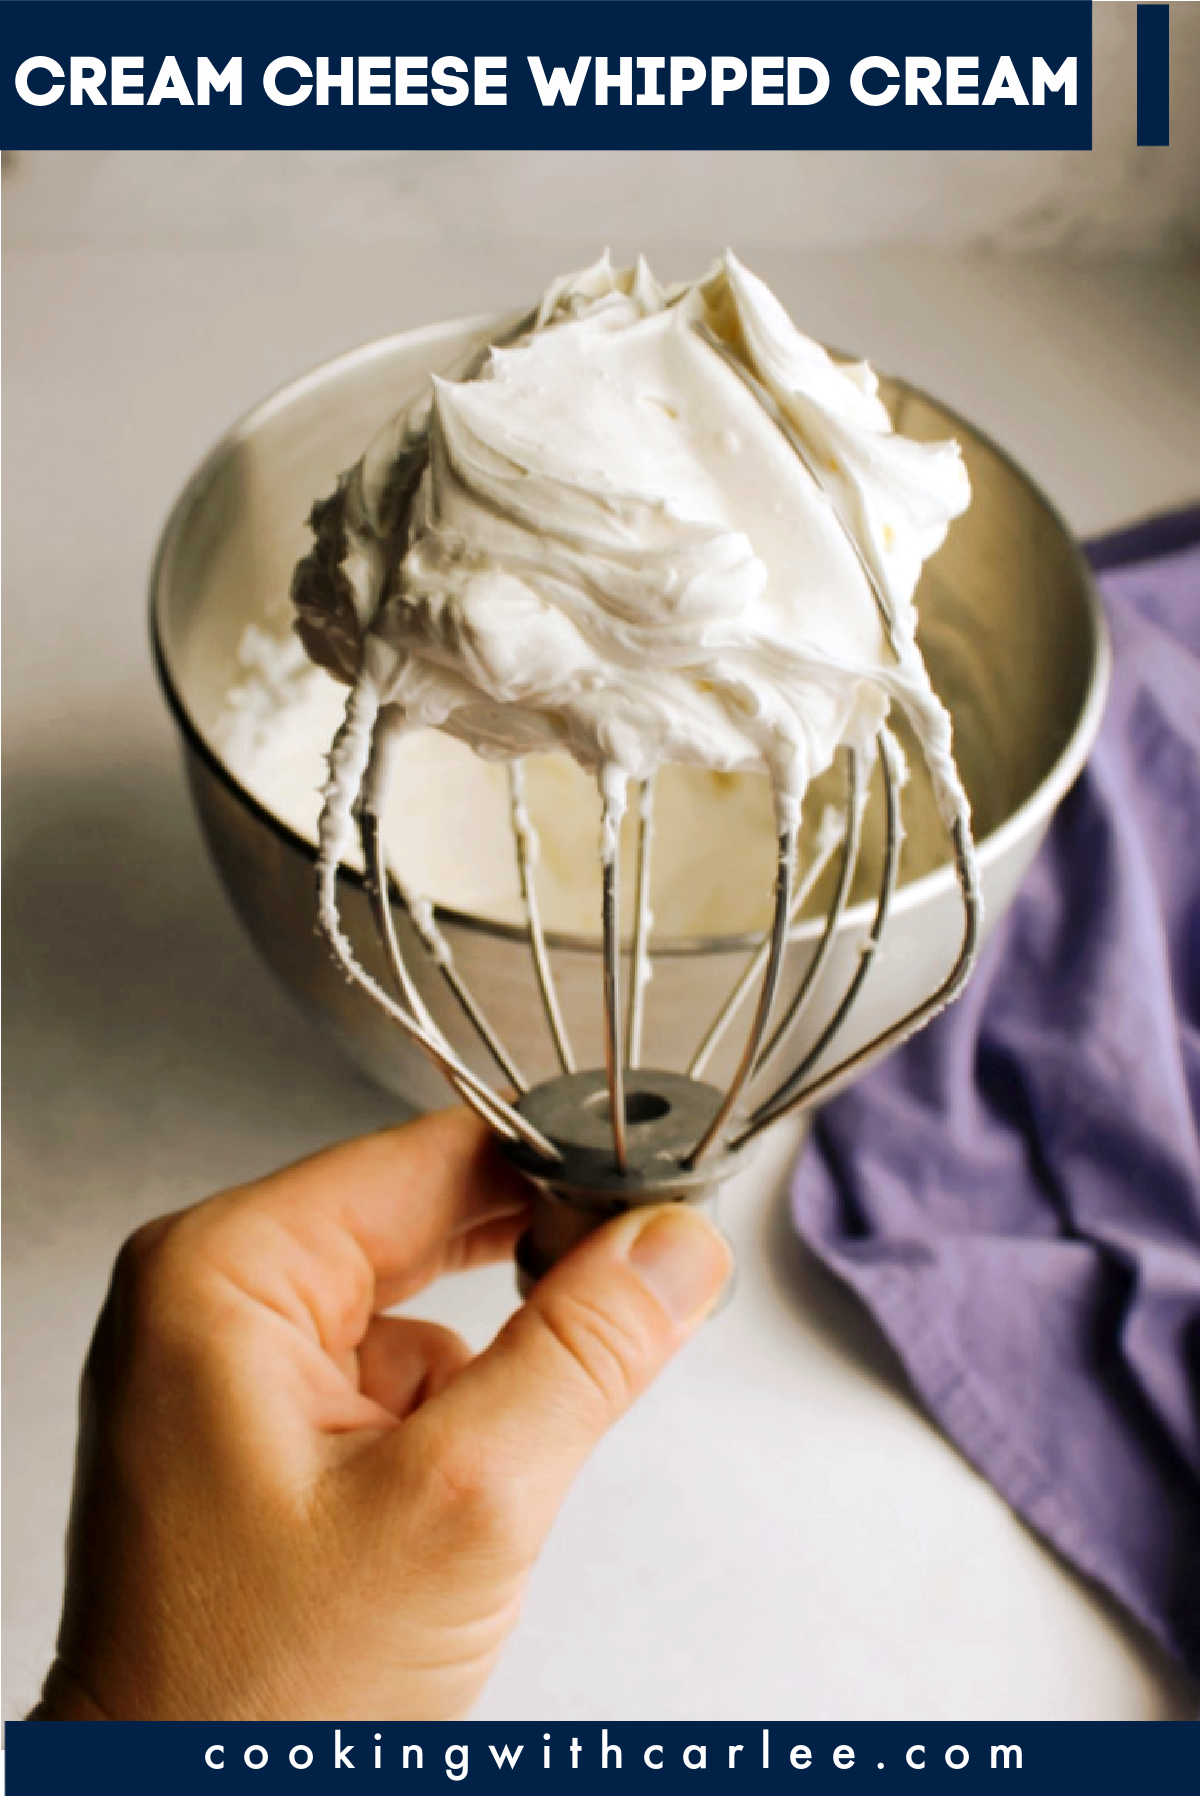 Cream cheese whipped cream is more stable than plain whipped cream, plus it has a little bit of cream cheese tang. This is the perfect way to top so many desserts including pumpkin pie, cheesecakes, pound cakes and more!